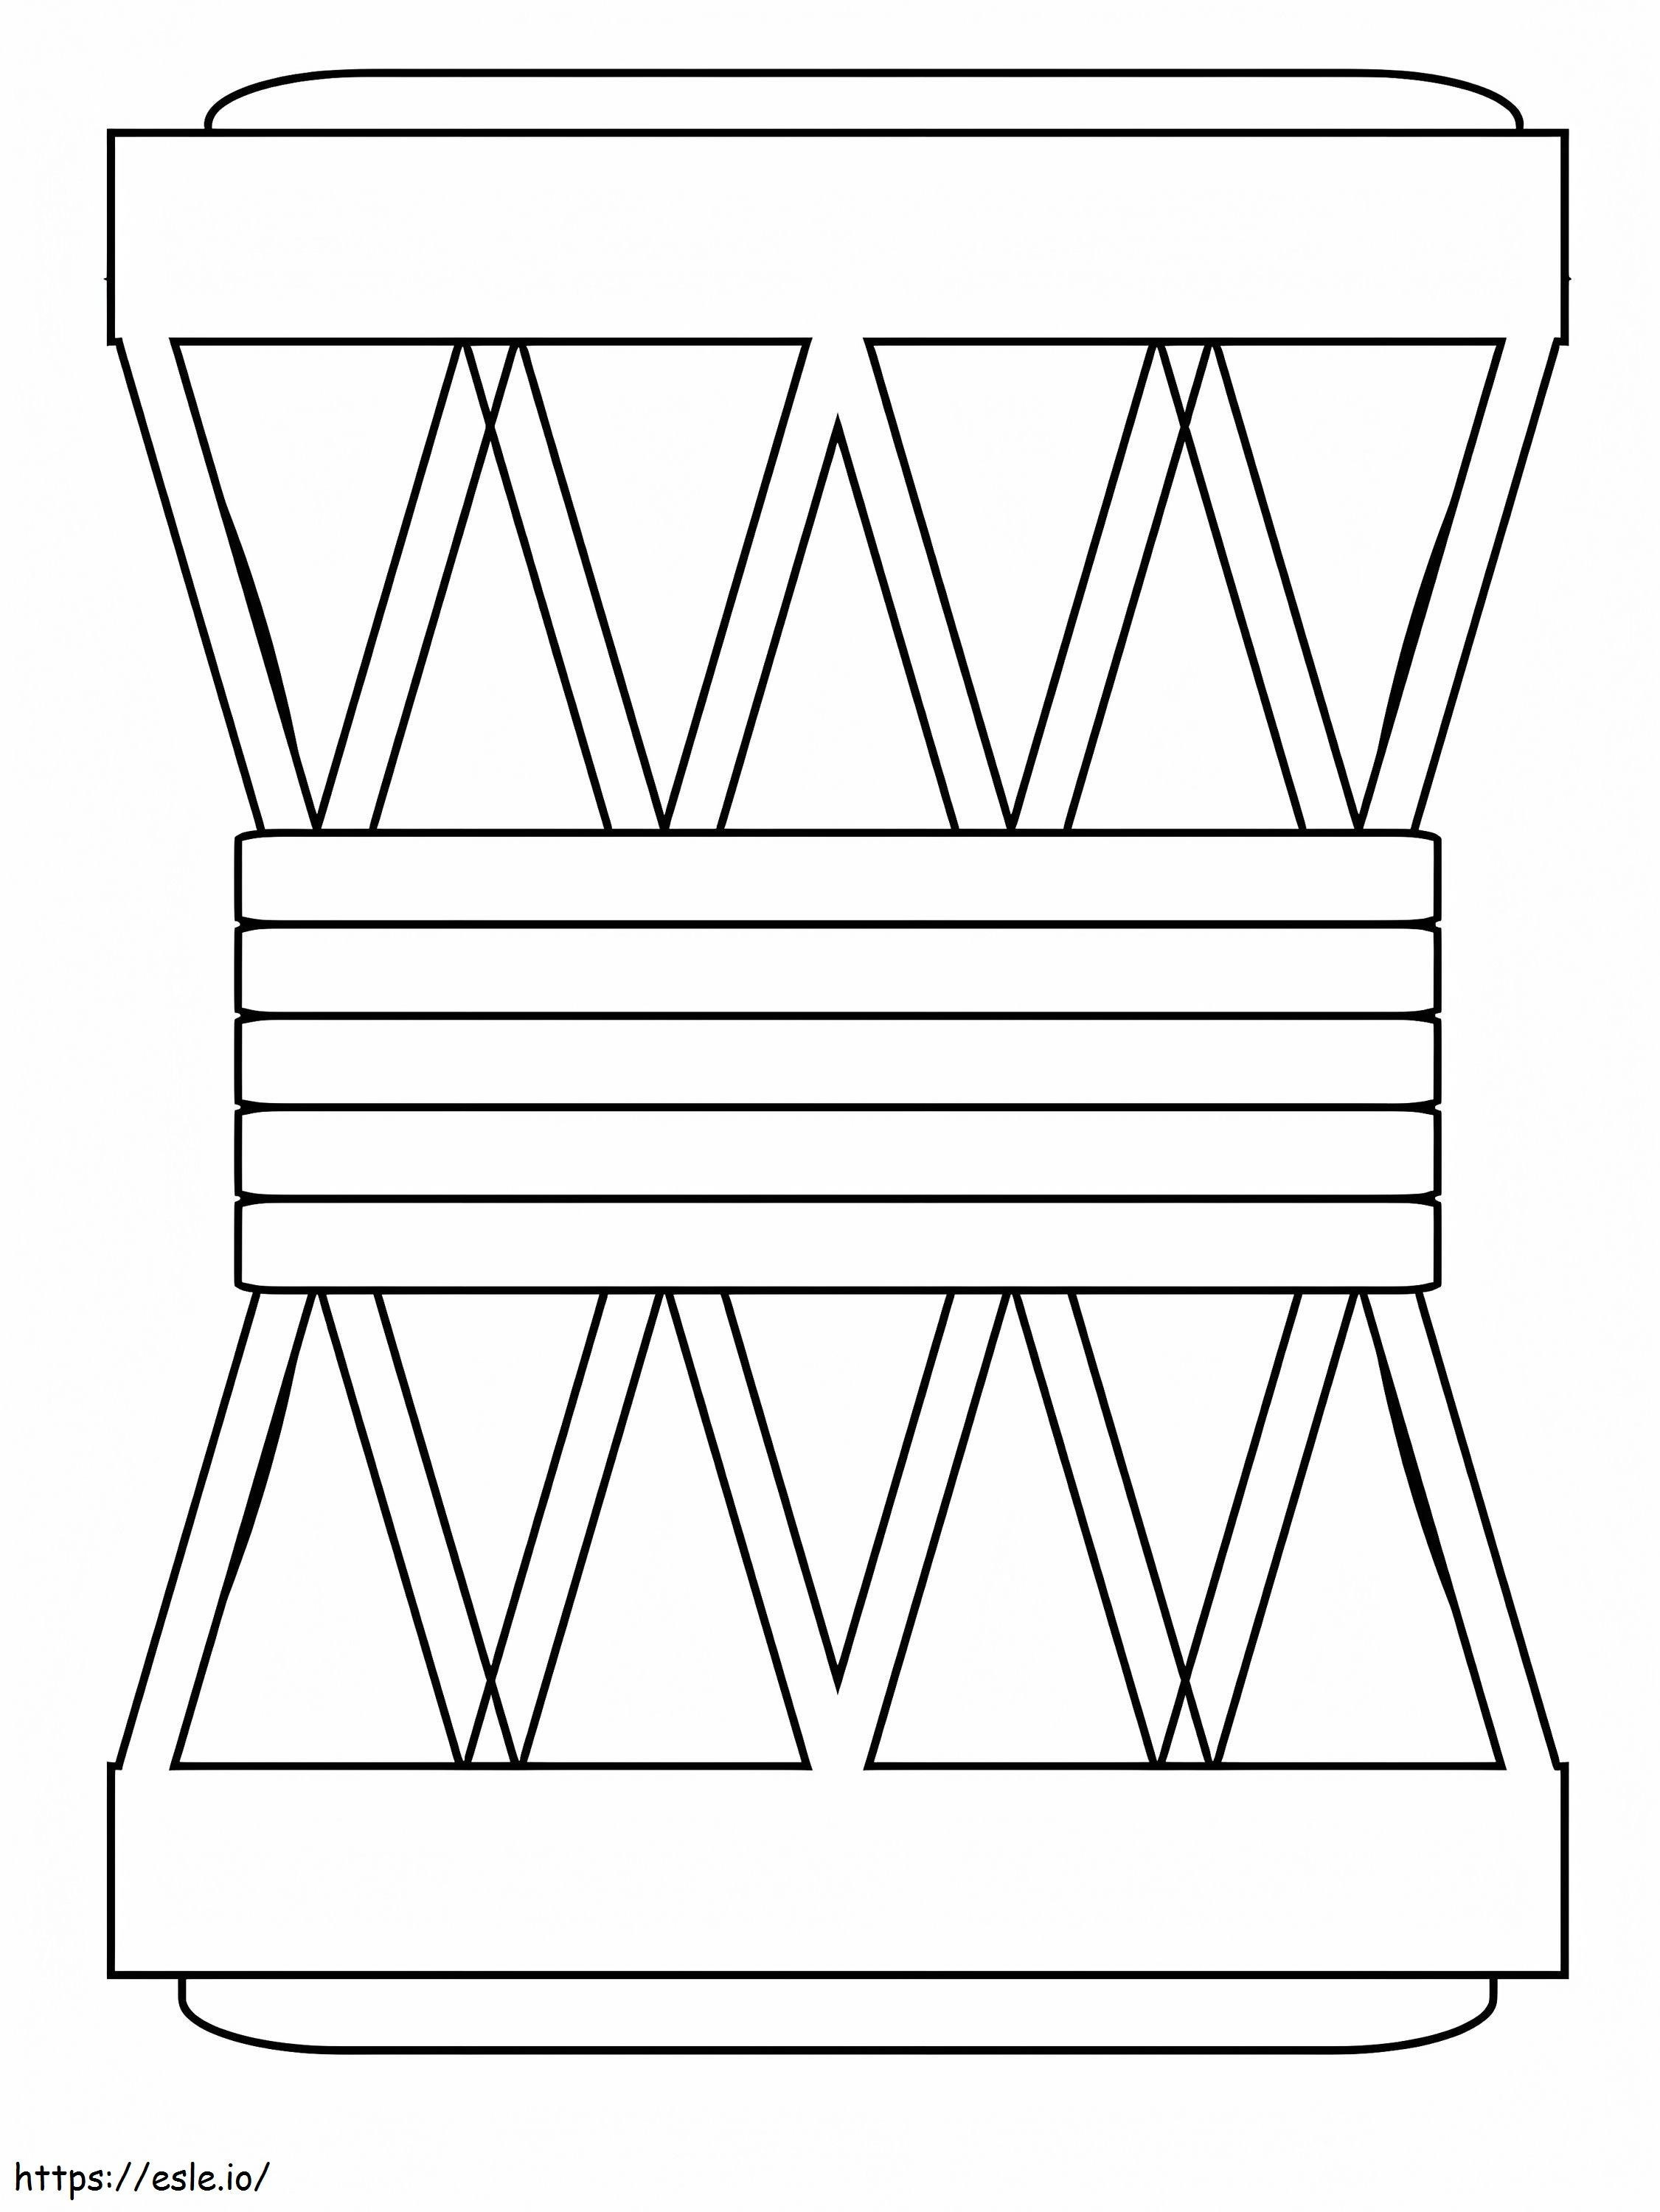 African Drums coloring page